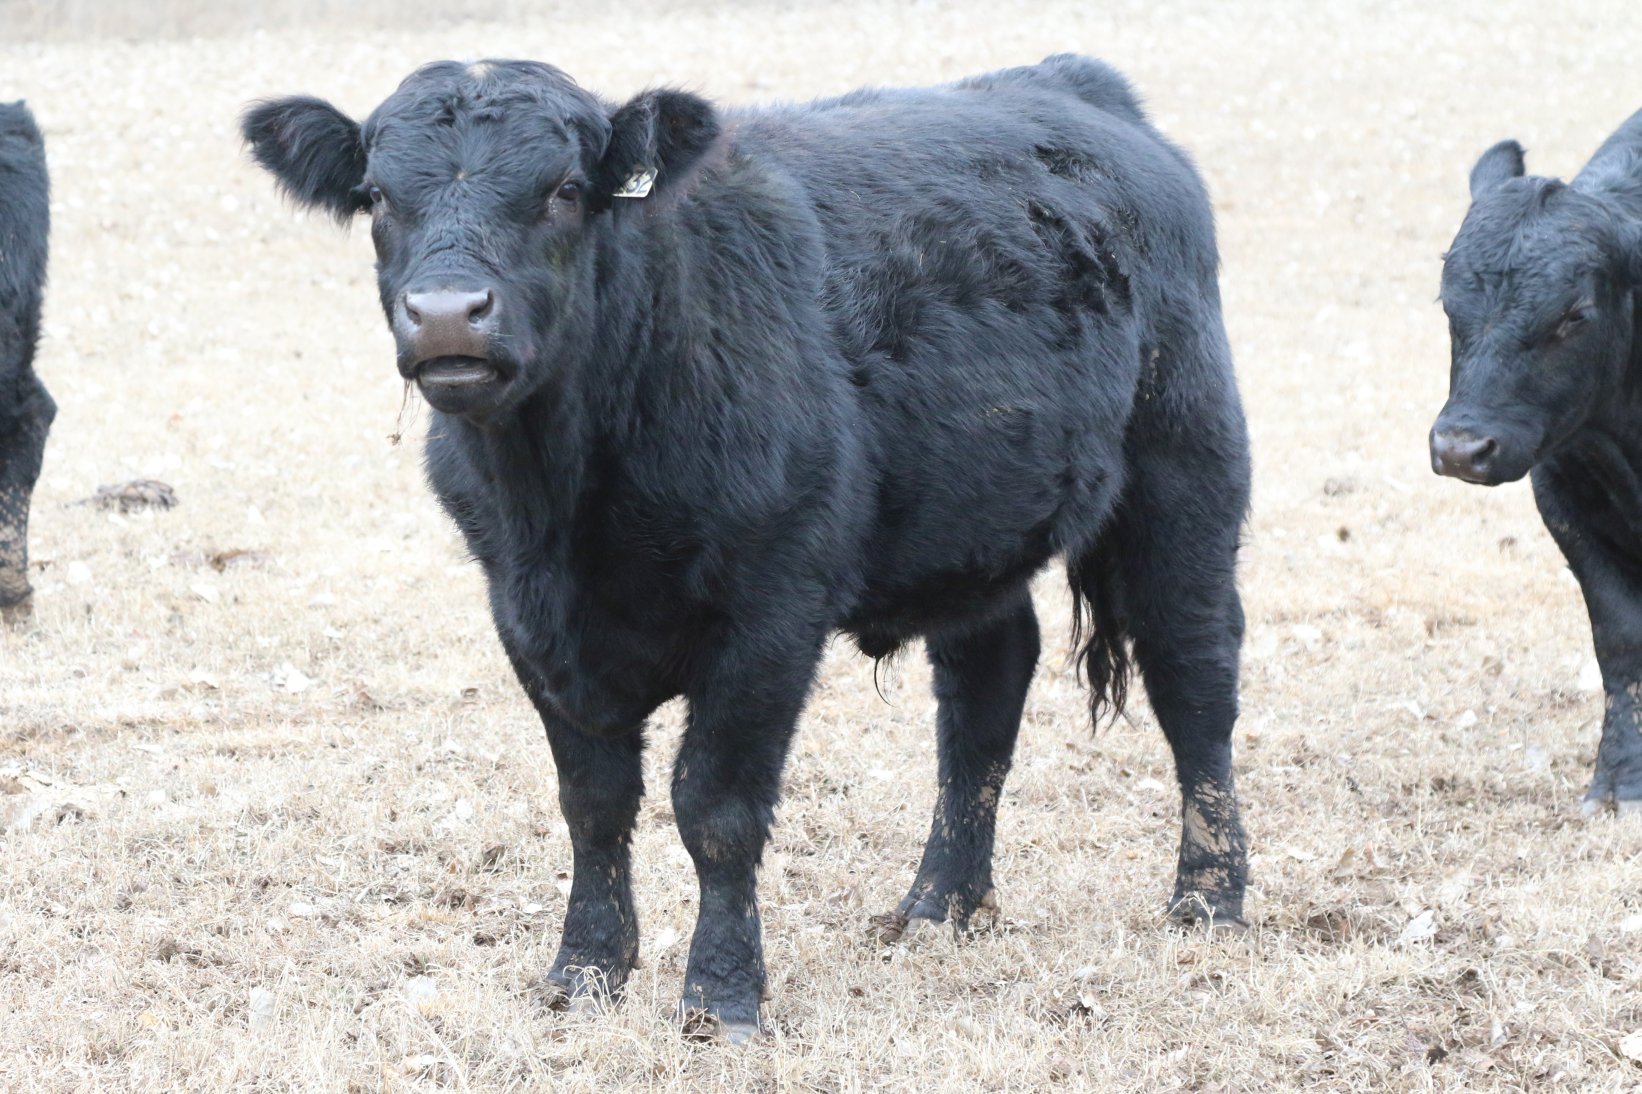 Registered Angus Bulls - 2 year olds